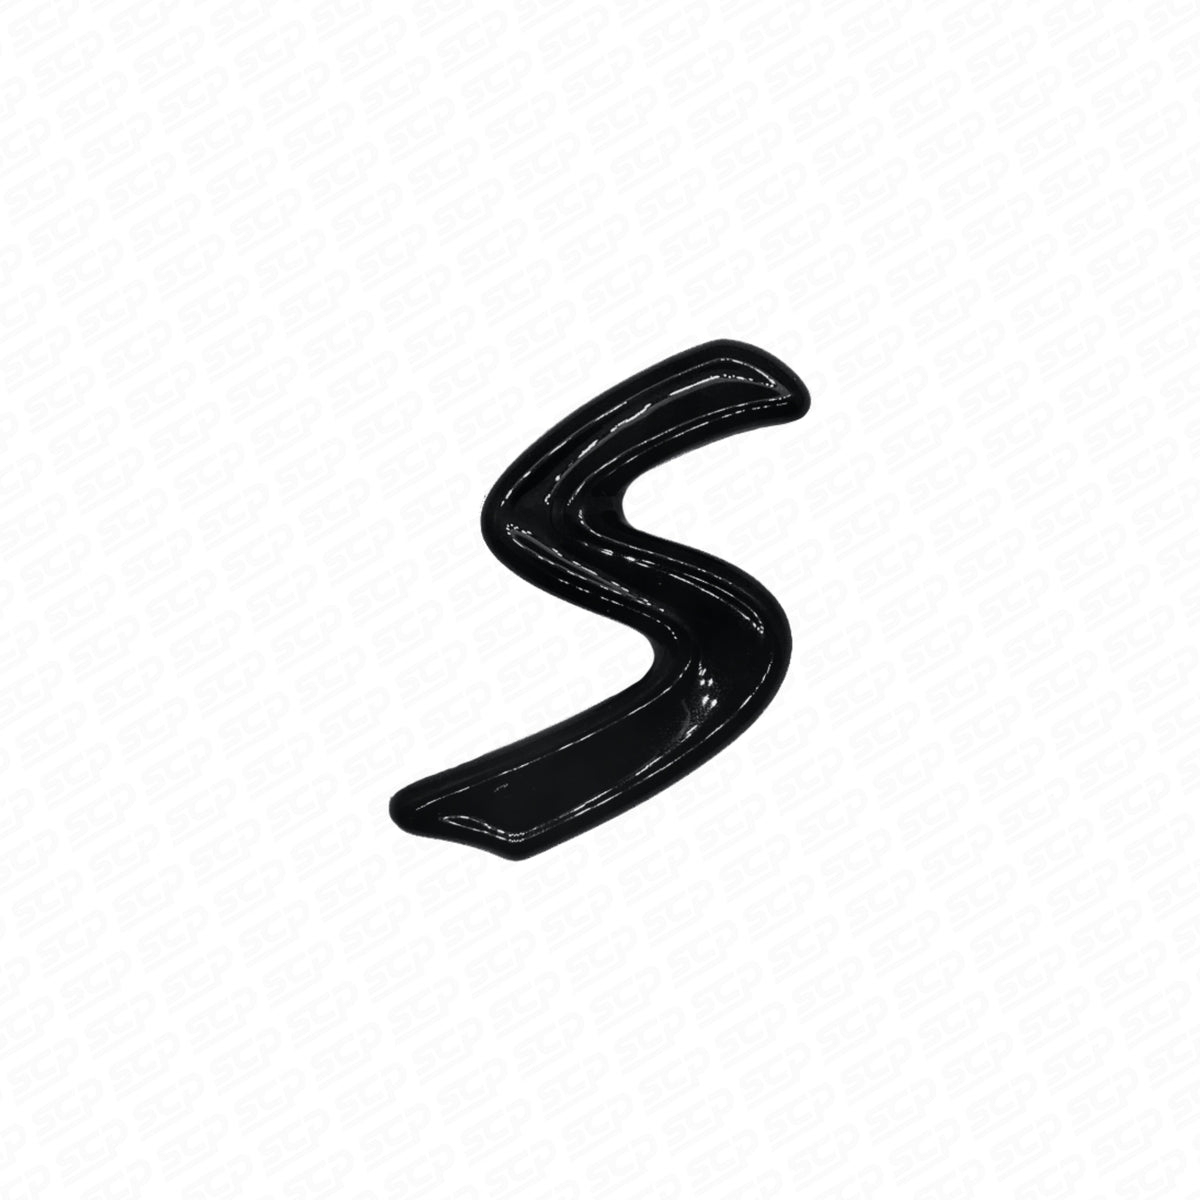 MINI Cooper S Front Grille Badge Cover